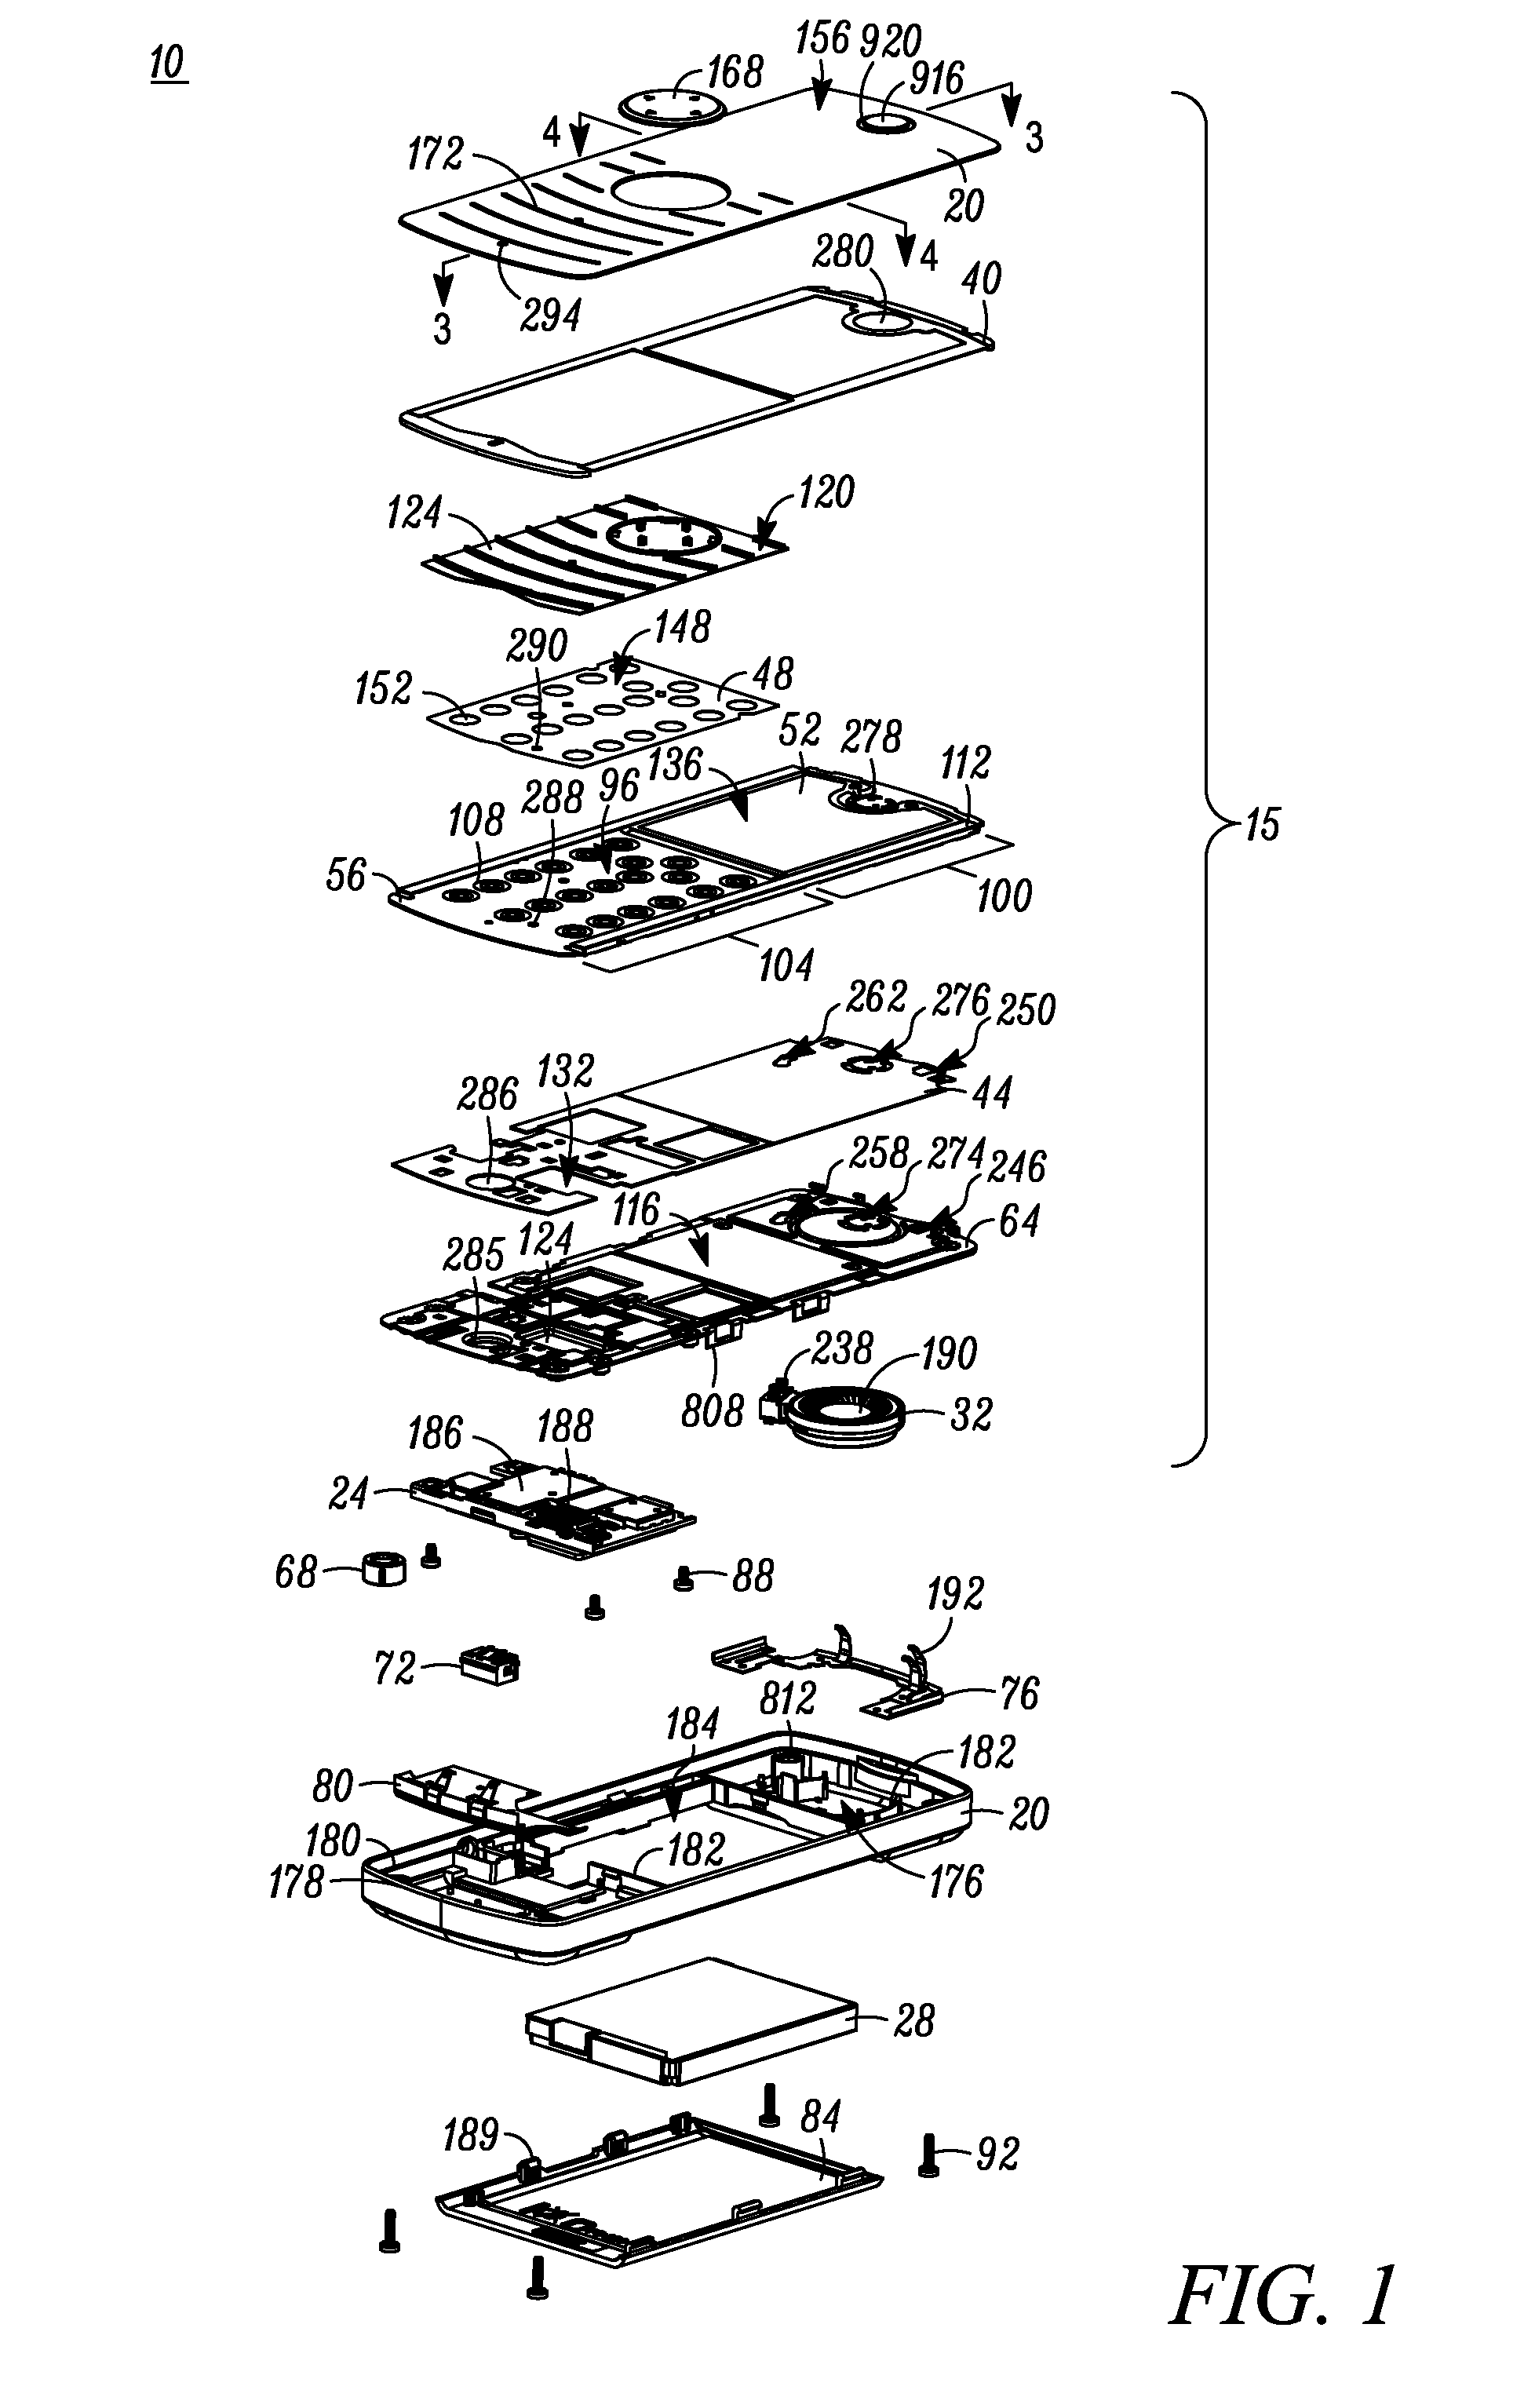 Handset device with audio porting